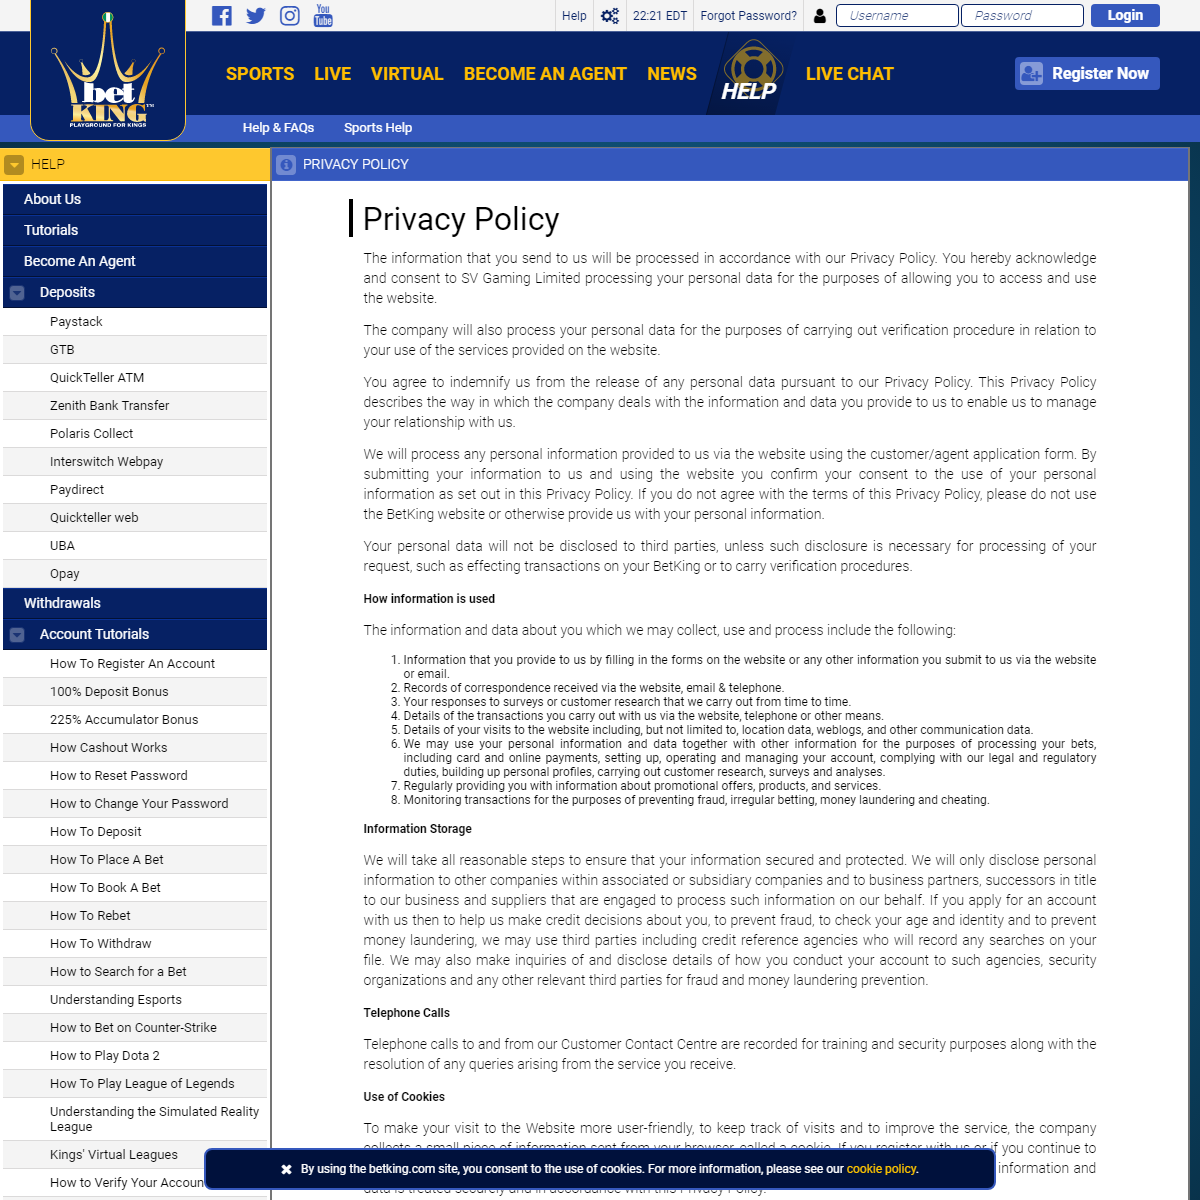 A complete backup of https://www.betking.com/help/general-help/terms-and-conditions/privacy-policy/